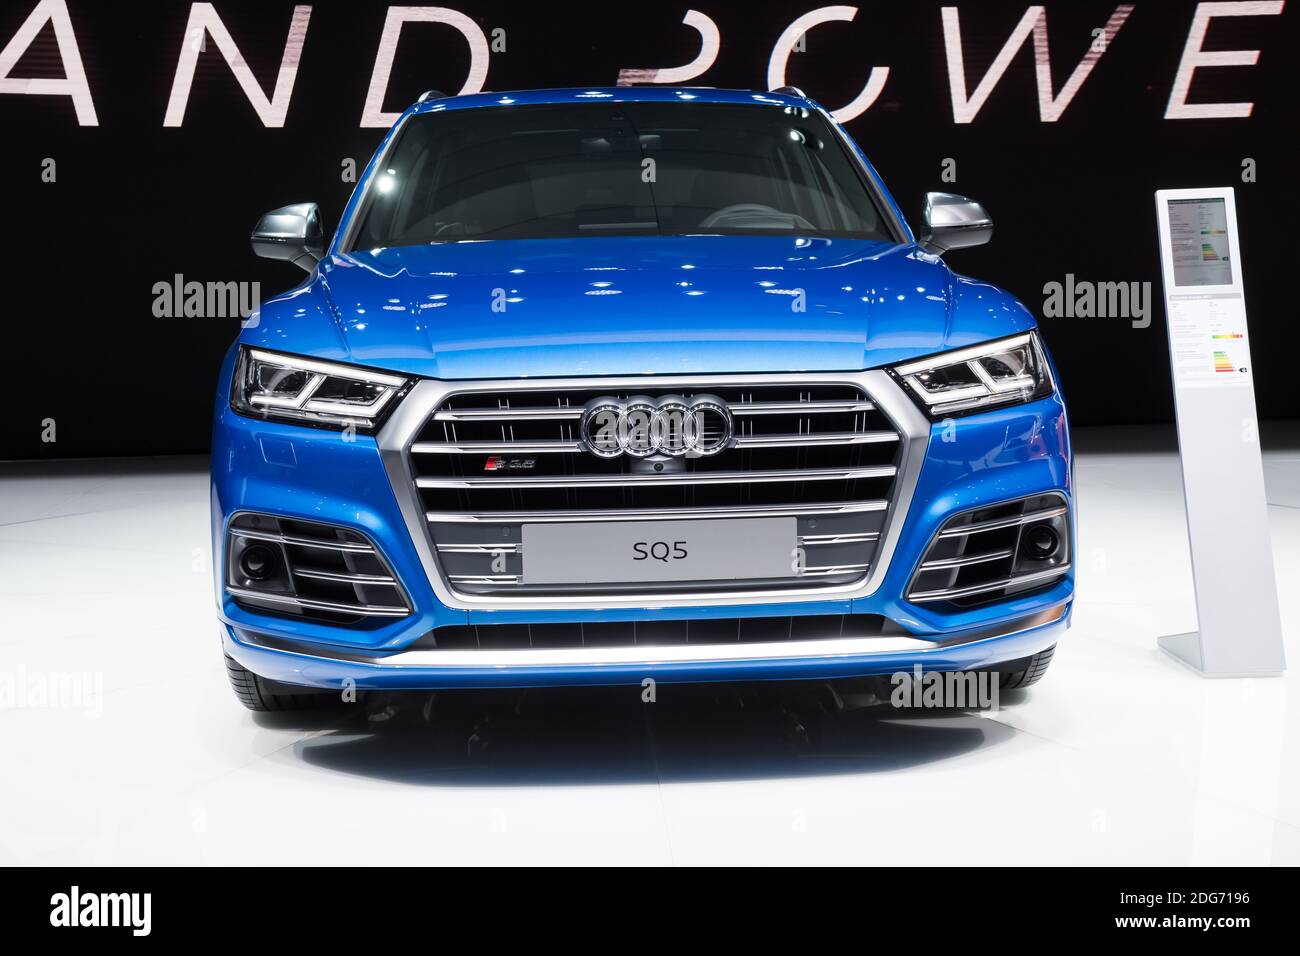 Audi SQ5 is on display during the 87th Geneva International Motor Show at Palexpo Exhibition Centre in Geneva, Switzerland on March 08, 2017. The show opens to the public on March 9 to 19. Photo by Loona/ABACAPRESS.COM Stock Photo